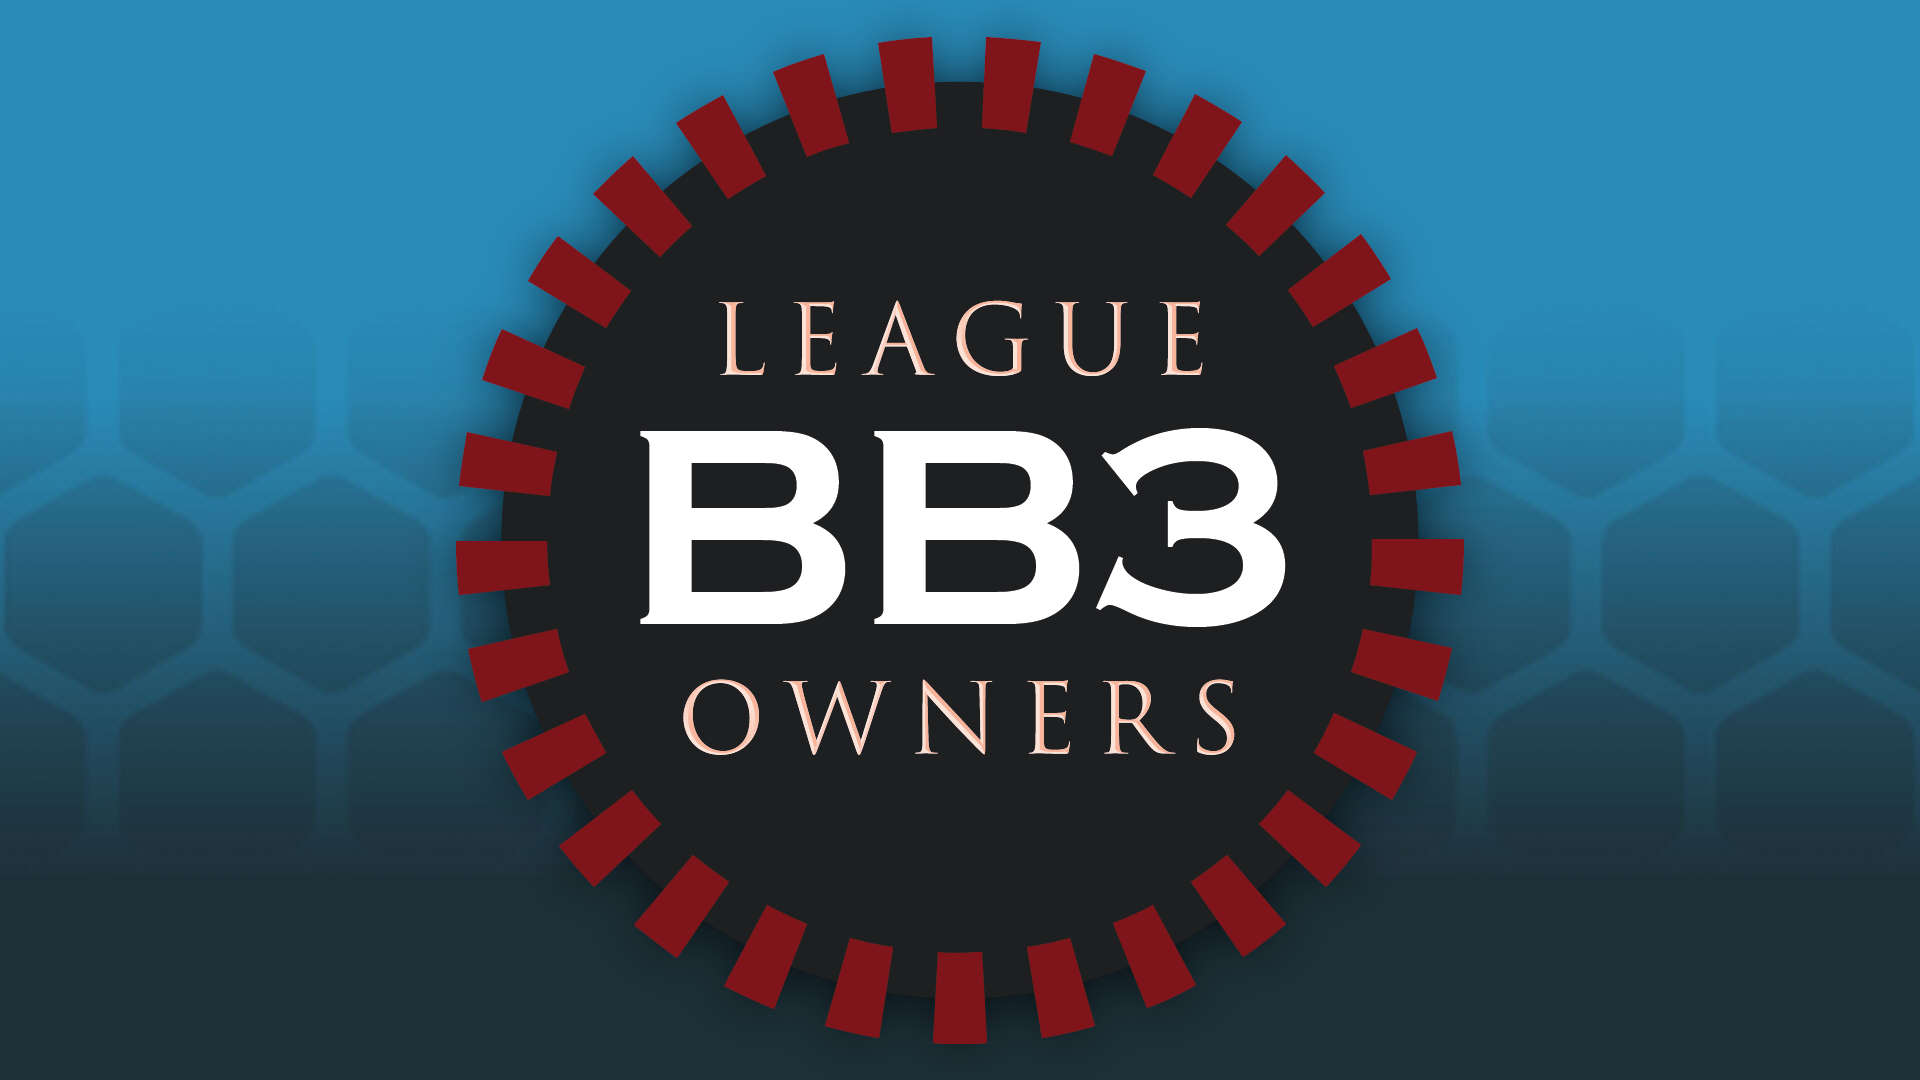 Blood Bowl 3 League Owners initiative logo - authors of the community letter to Cyanide studio